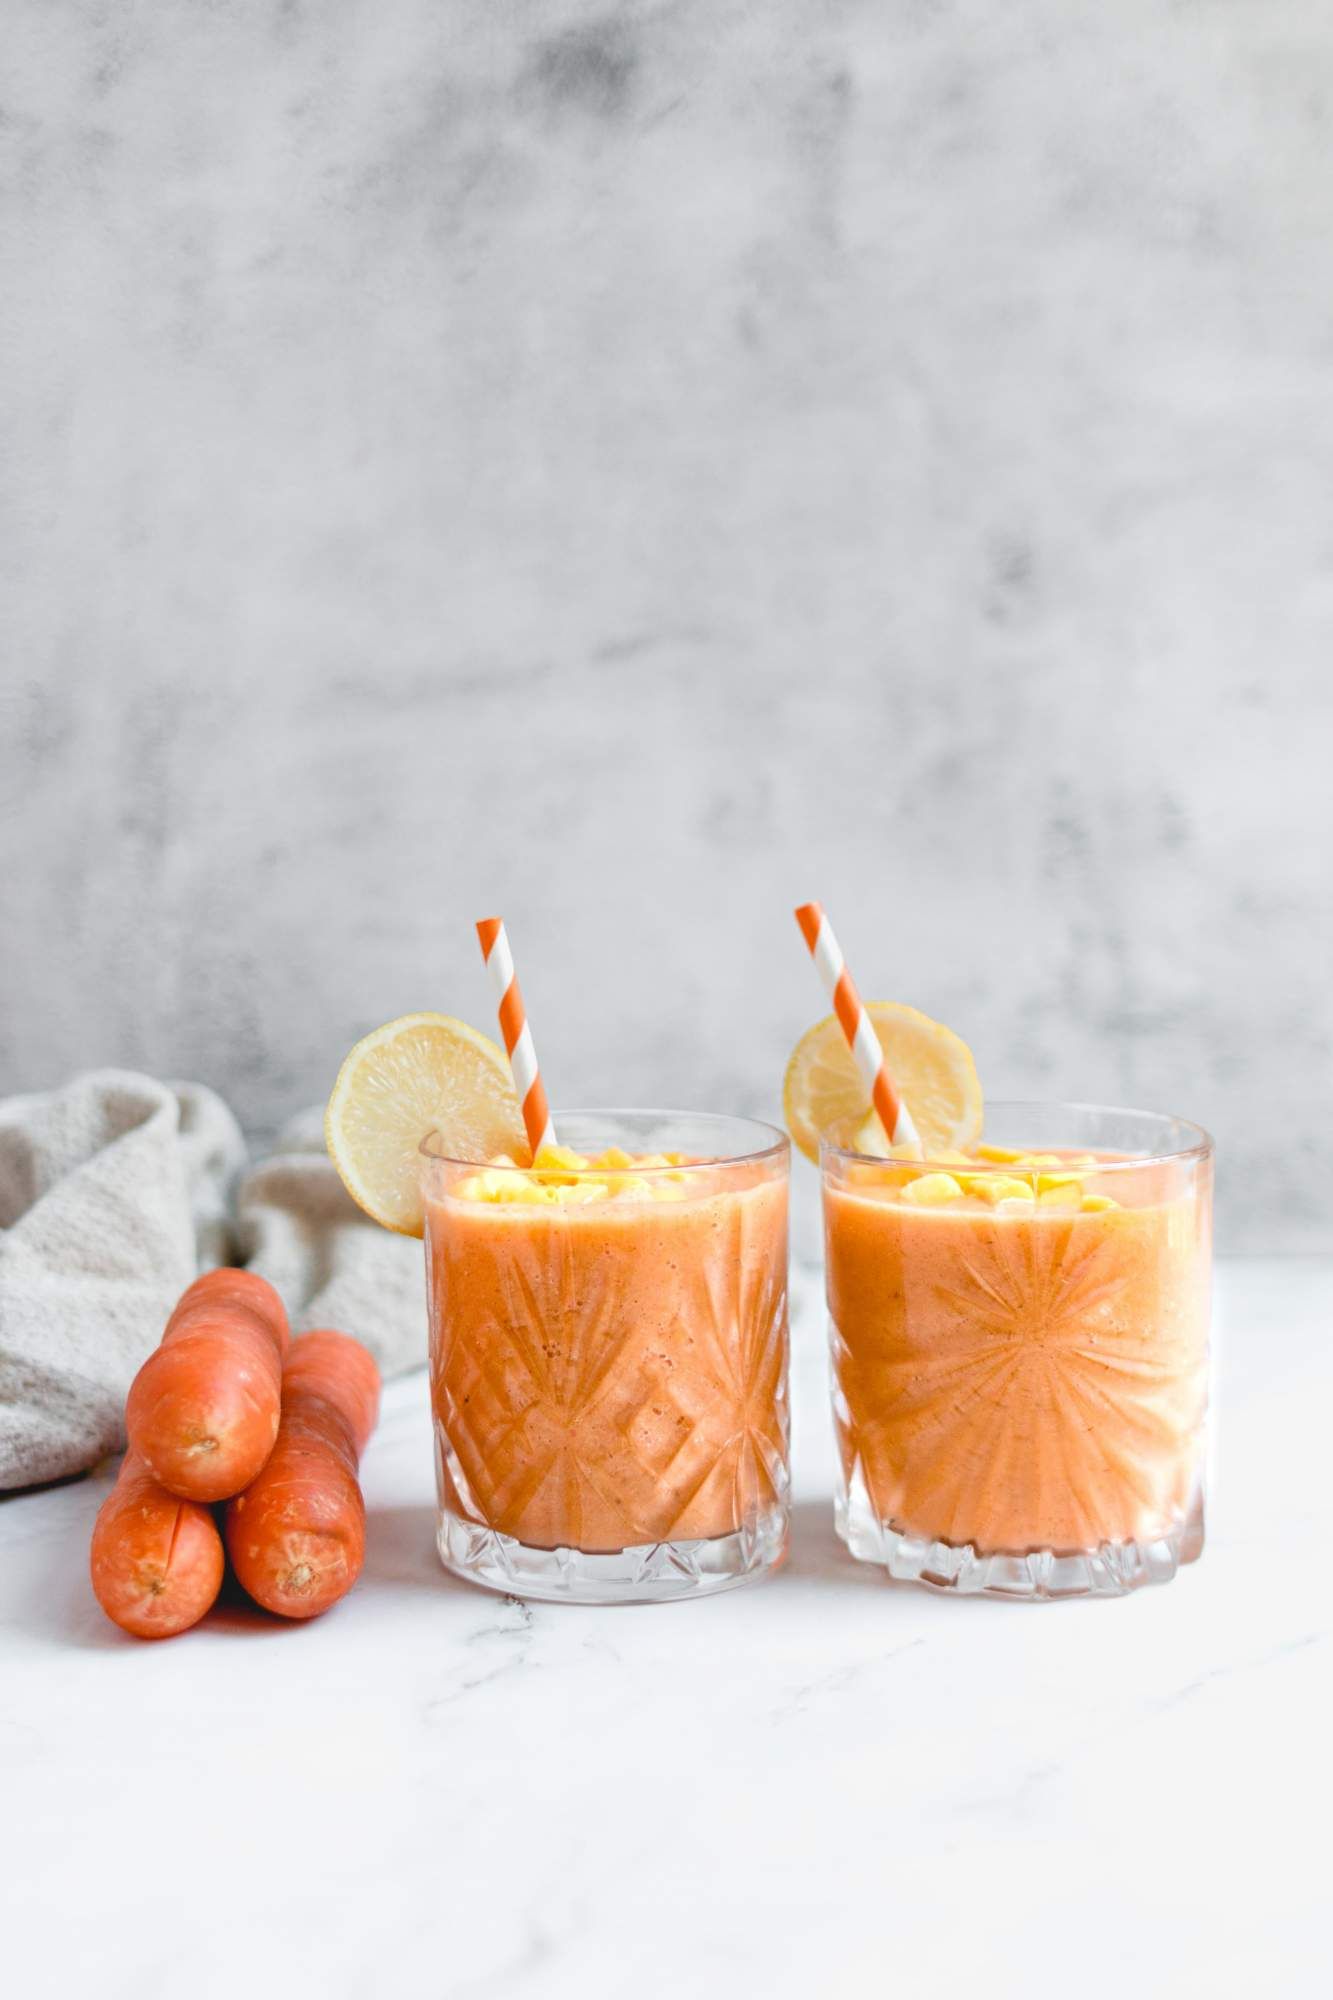 Creamy carrot and ginger smoothie with mangos, bananas, carrots, ginger, and almond milk  poured in two glasses.